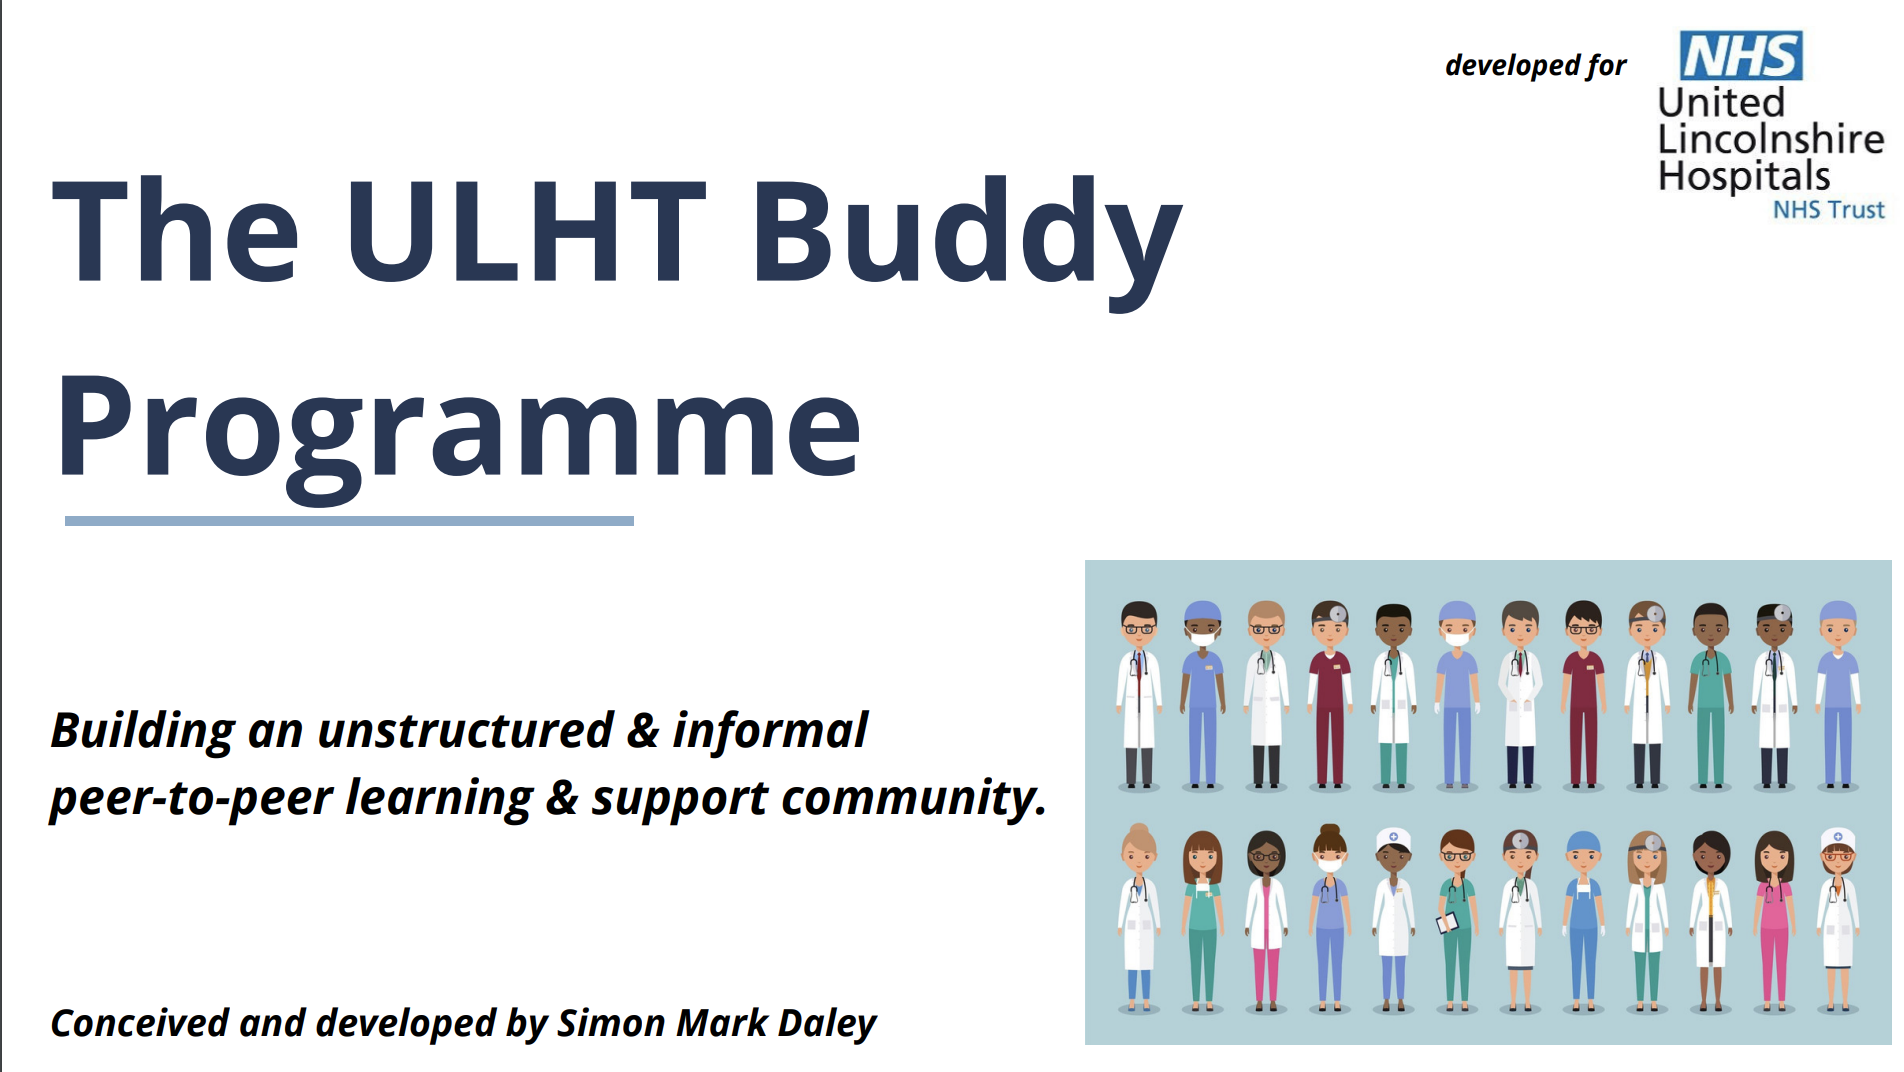 ULHT Buddy Programme; Building an unstructured & informal  peer-to-peer learning & support community. featured image